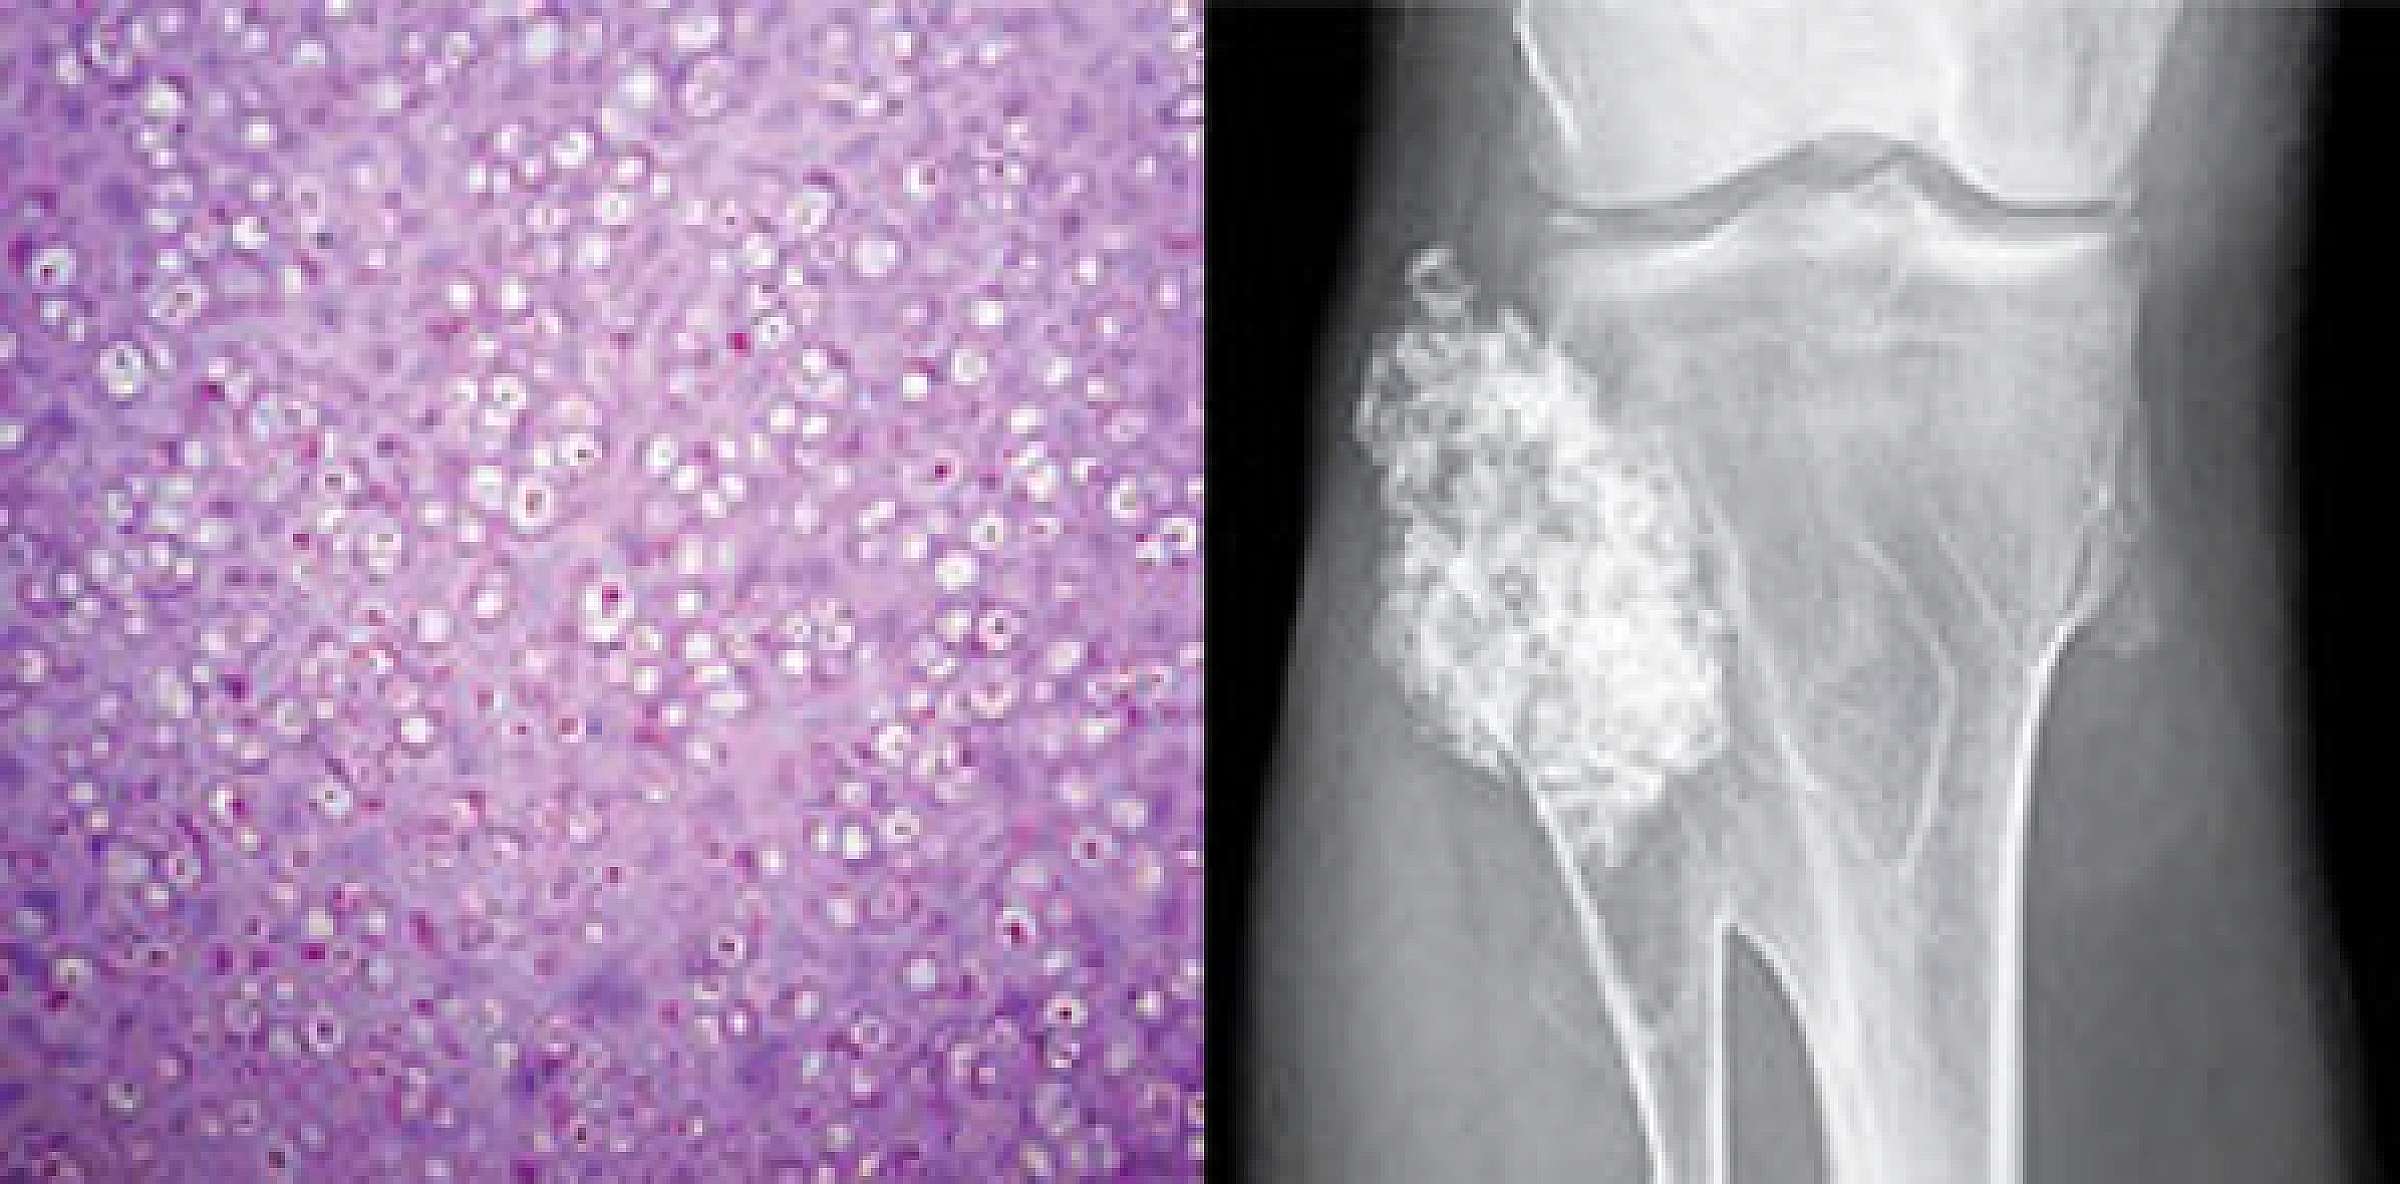 The tumor above, a peripheral chondrosarcoma just below the knee, devloped in a man who carries a mutated version of the EXT1 gene.